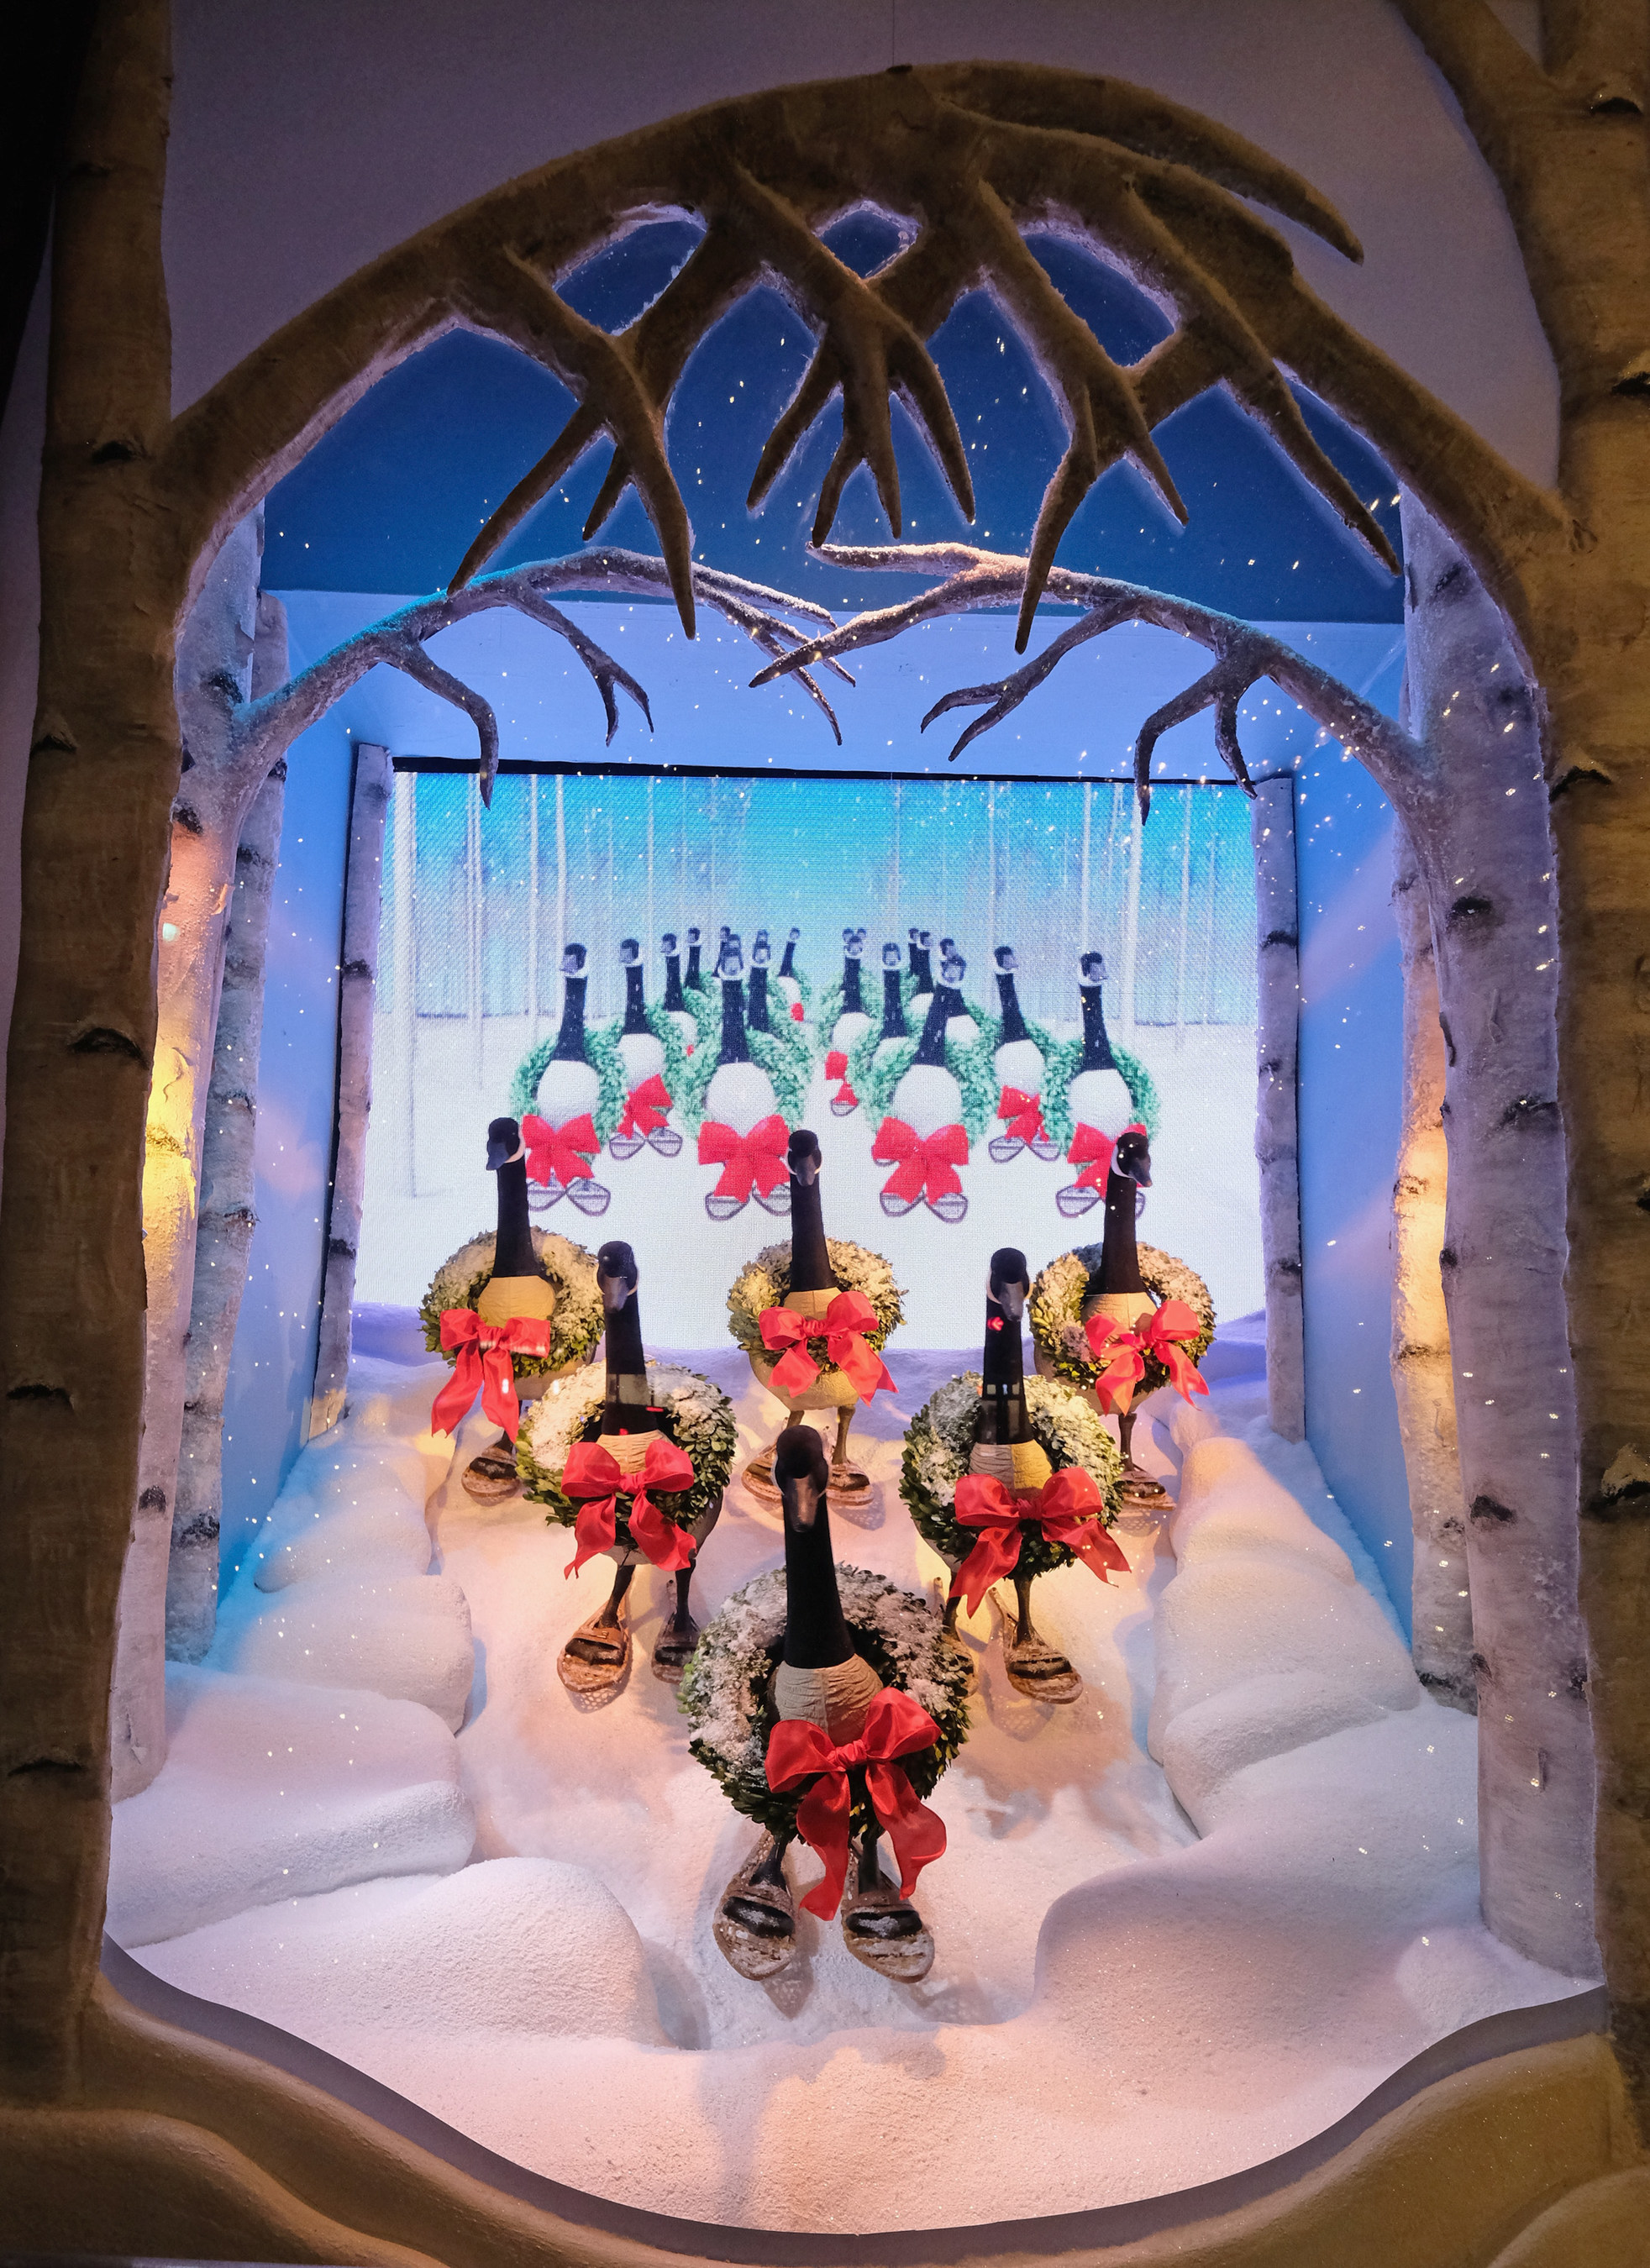 Lord & Taylor 2016 Holiday Windows. Photo credits: Dia Dipasupil & Cindy Ord, Getty Images